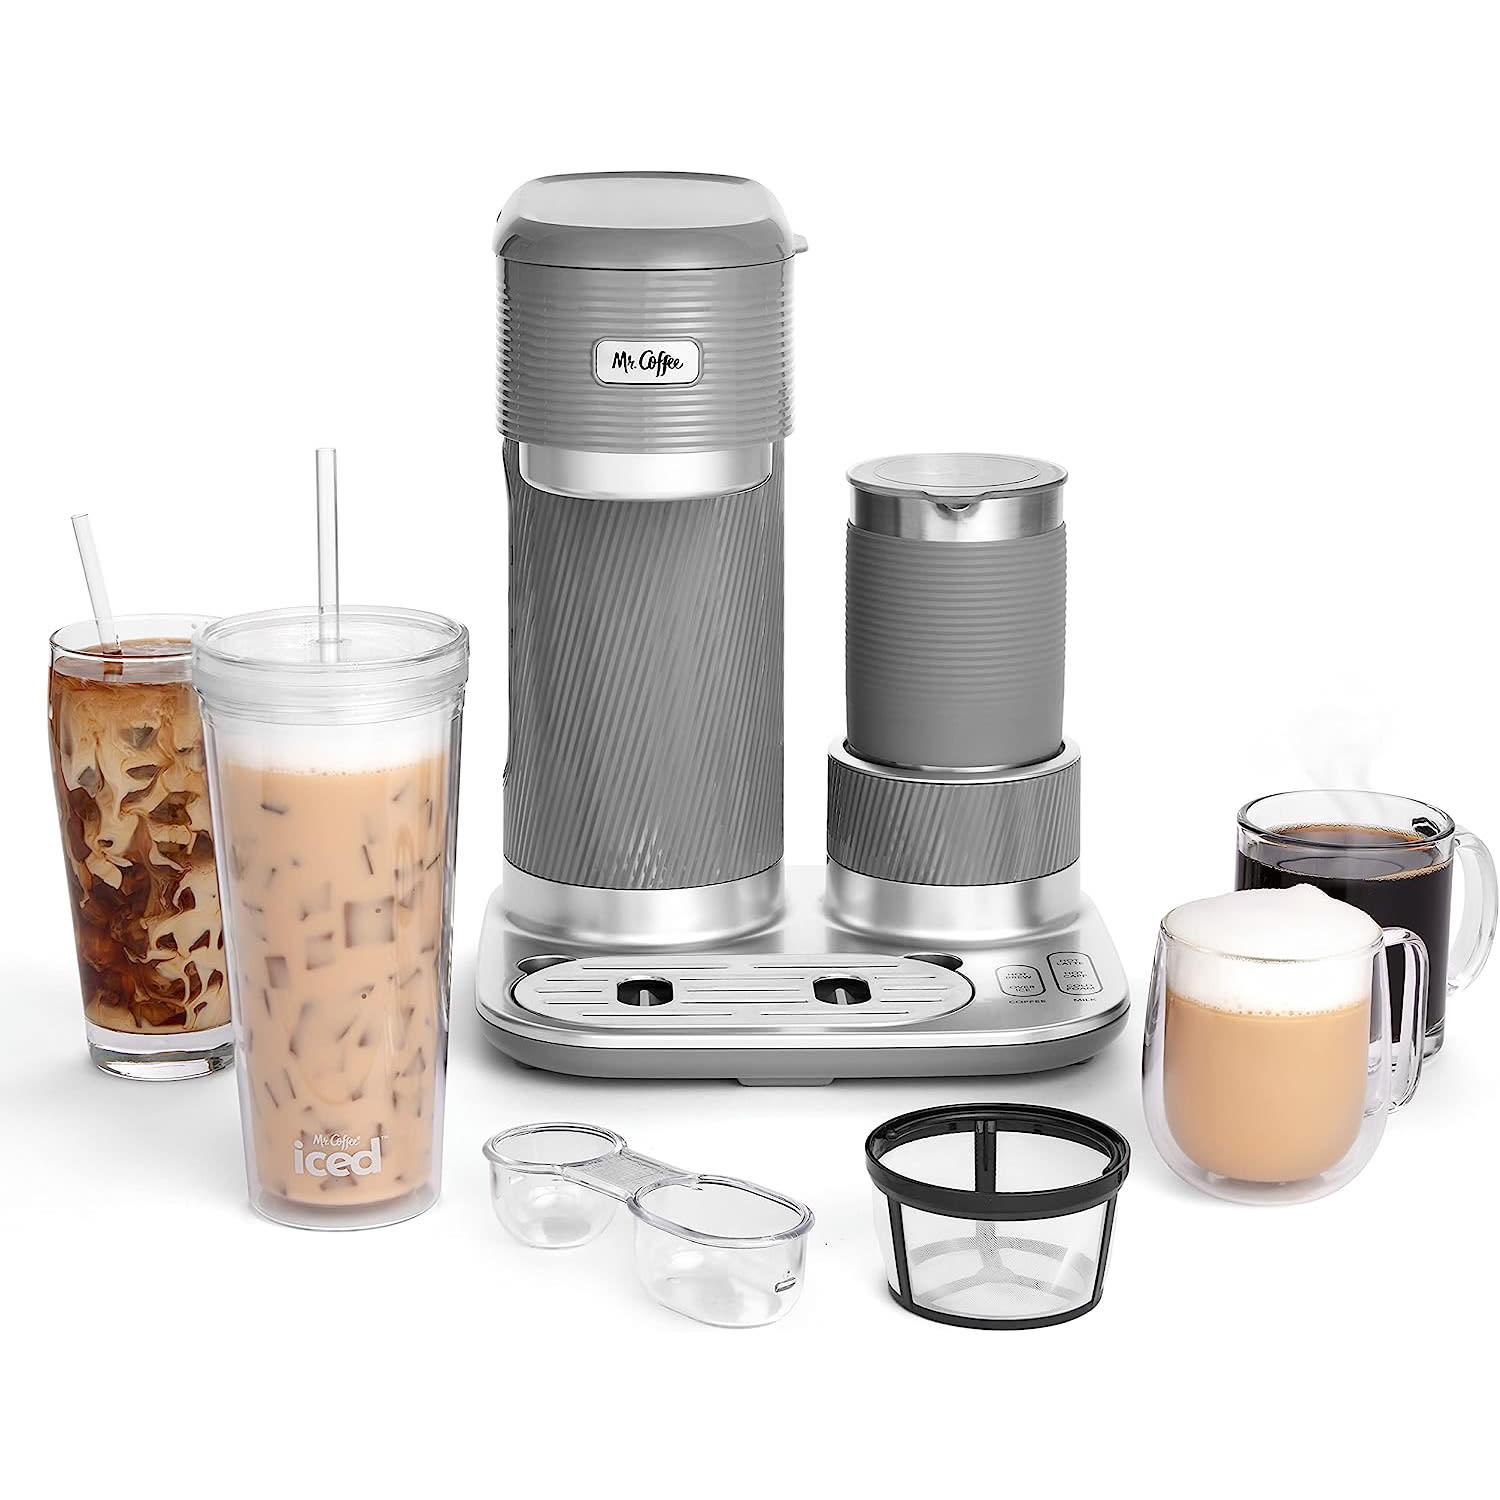 http://cdn.apartmenttherapy.info/image/upload/v1688408630/gen-workflow/product-database/mr-coffee-4-in-1-latte-lux-iced-hot-amazon.jpg